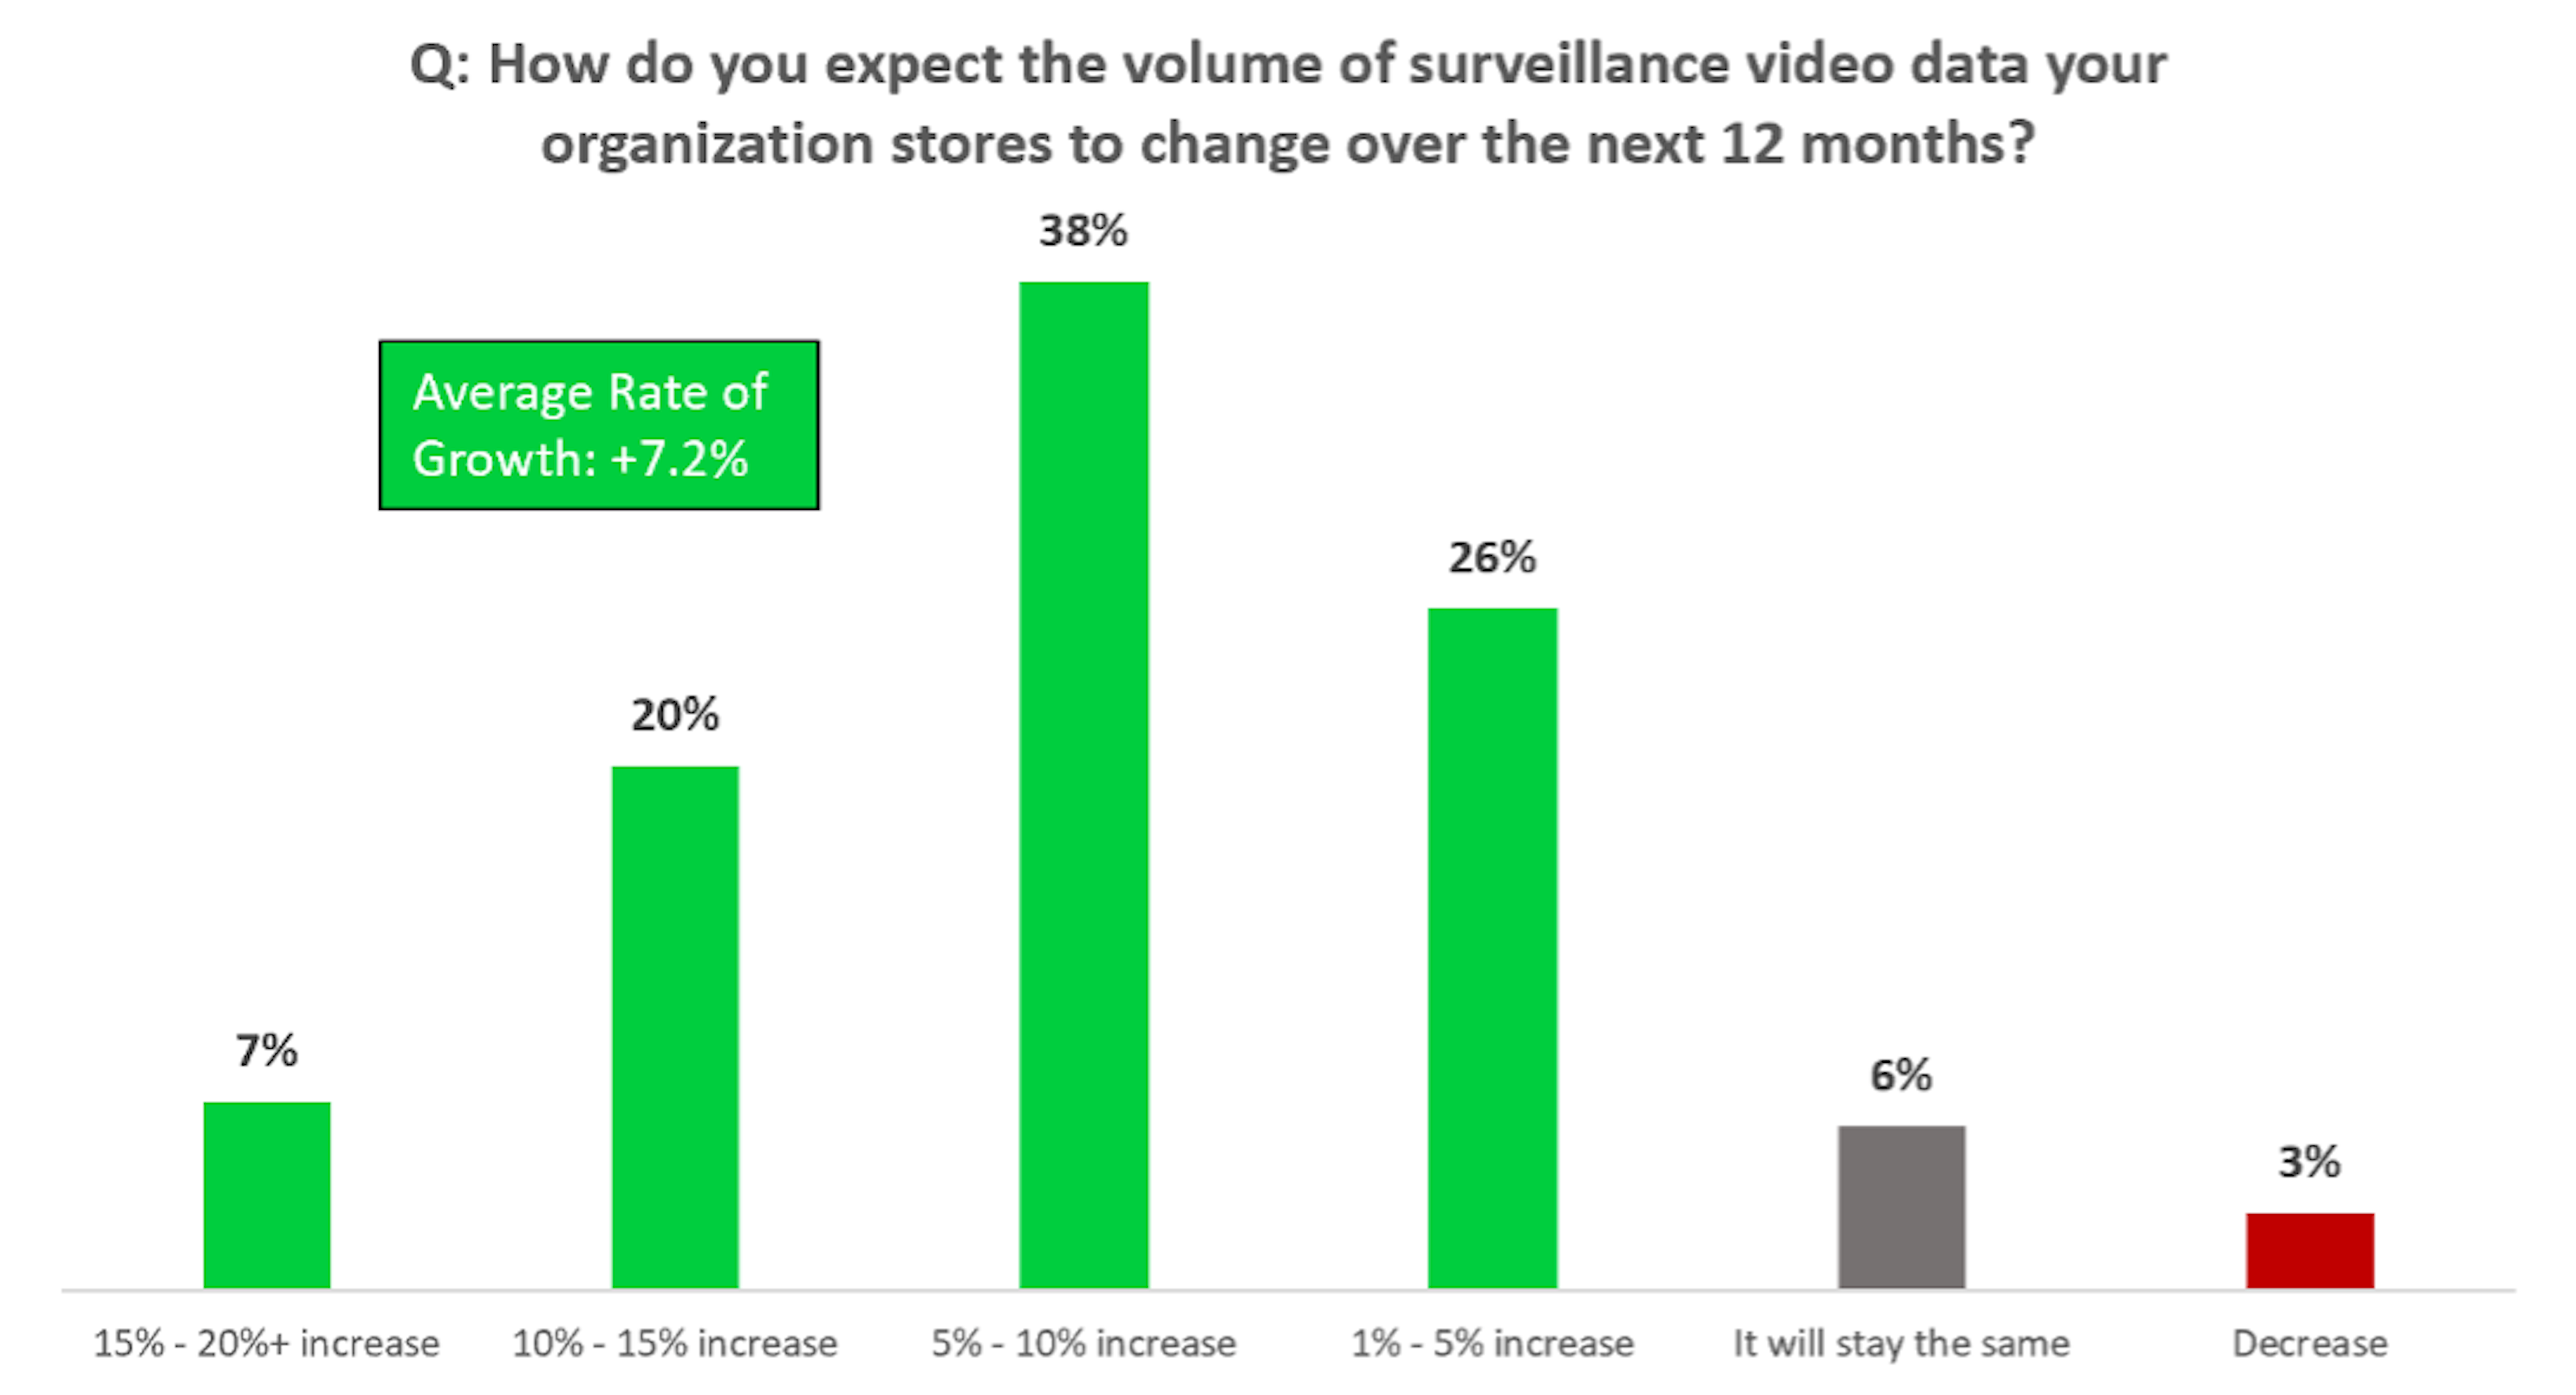 bar graph showing how customers expect volume of surveillance data will change over 12 months